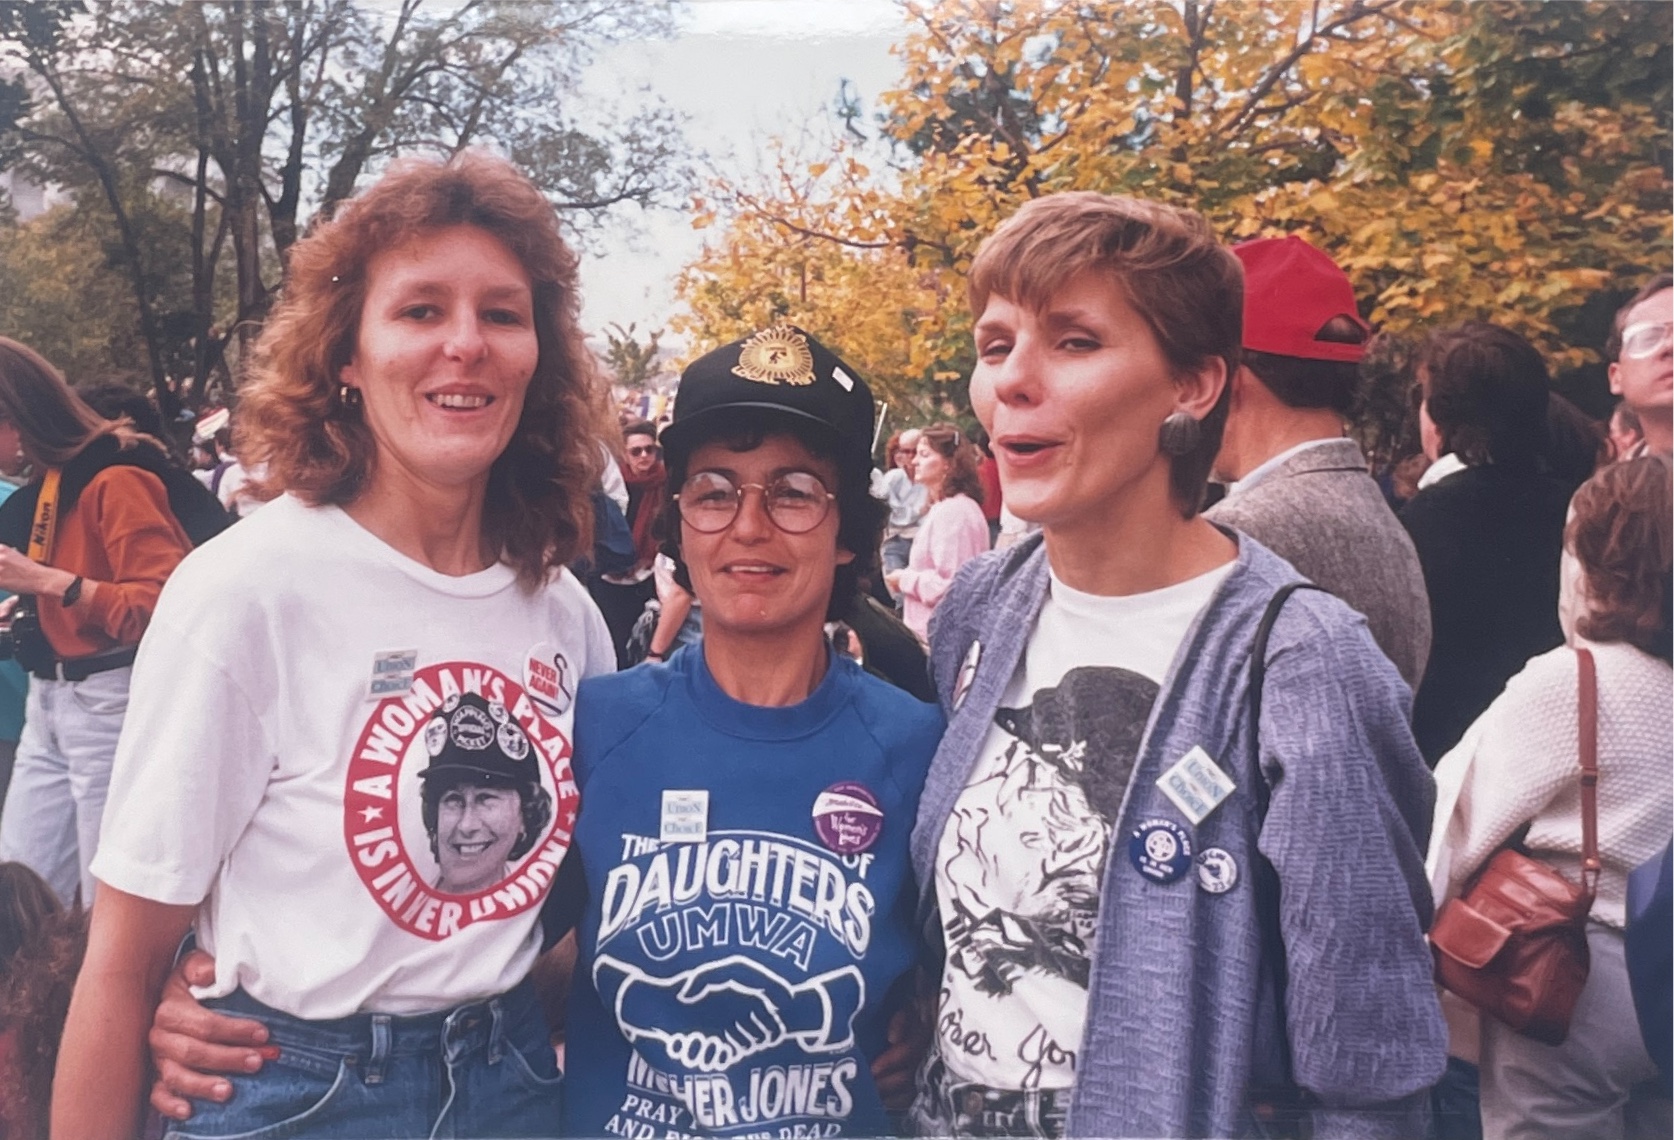 A photo of Kipp Dawson in between two other women, wearing buttons and shirts in support of the Daughters of UMWA.